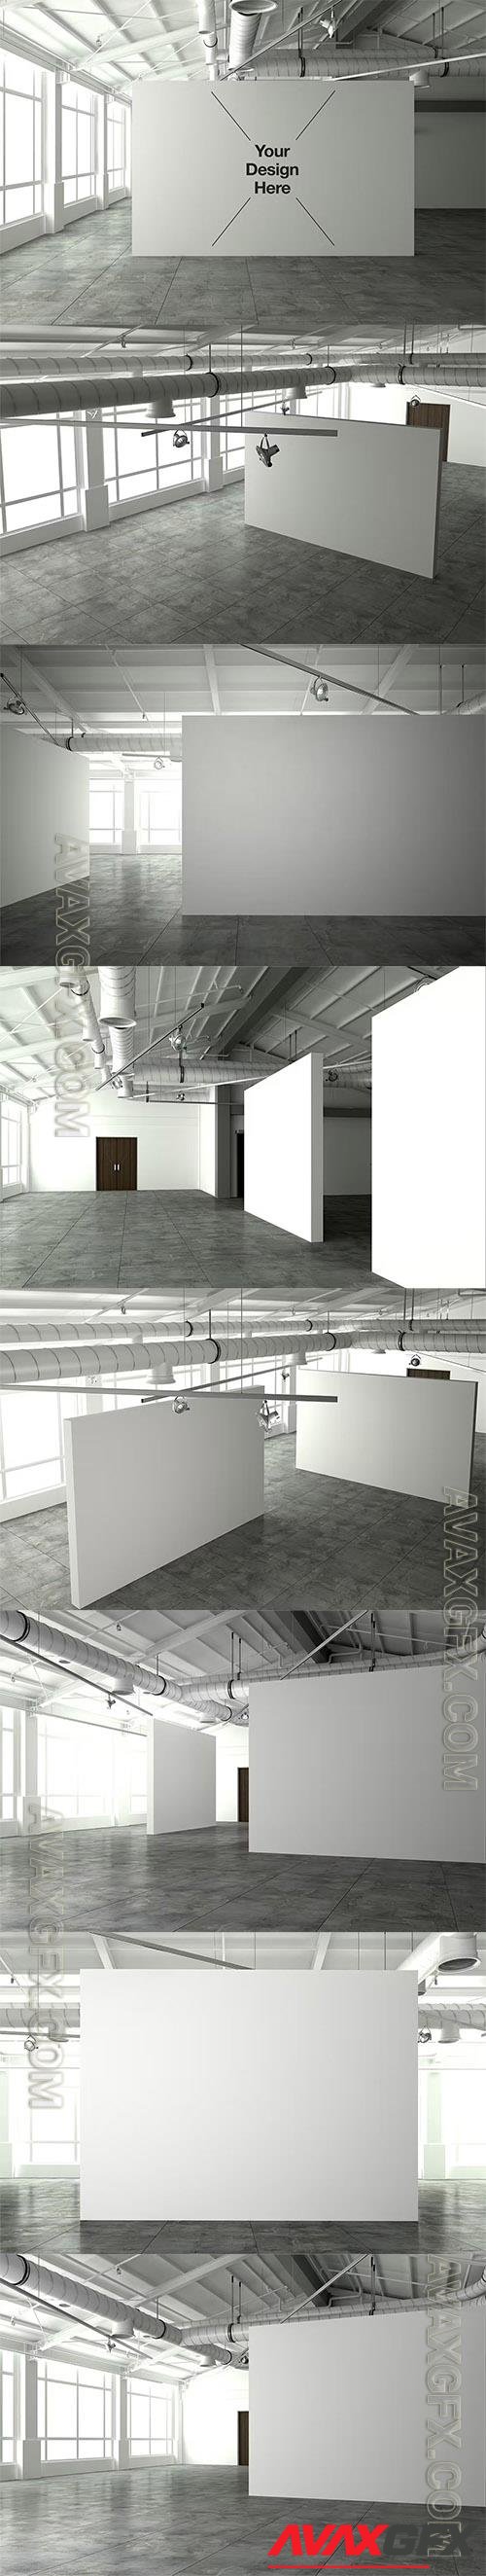 Gallery / Wall Graphic Mockup HLP24EJ